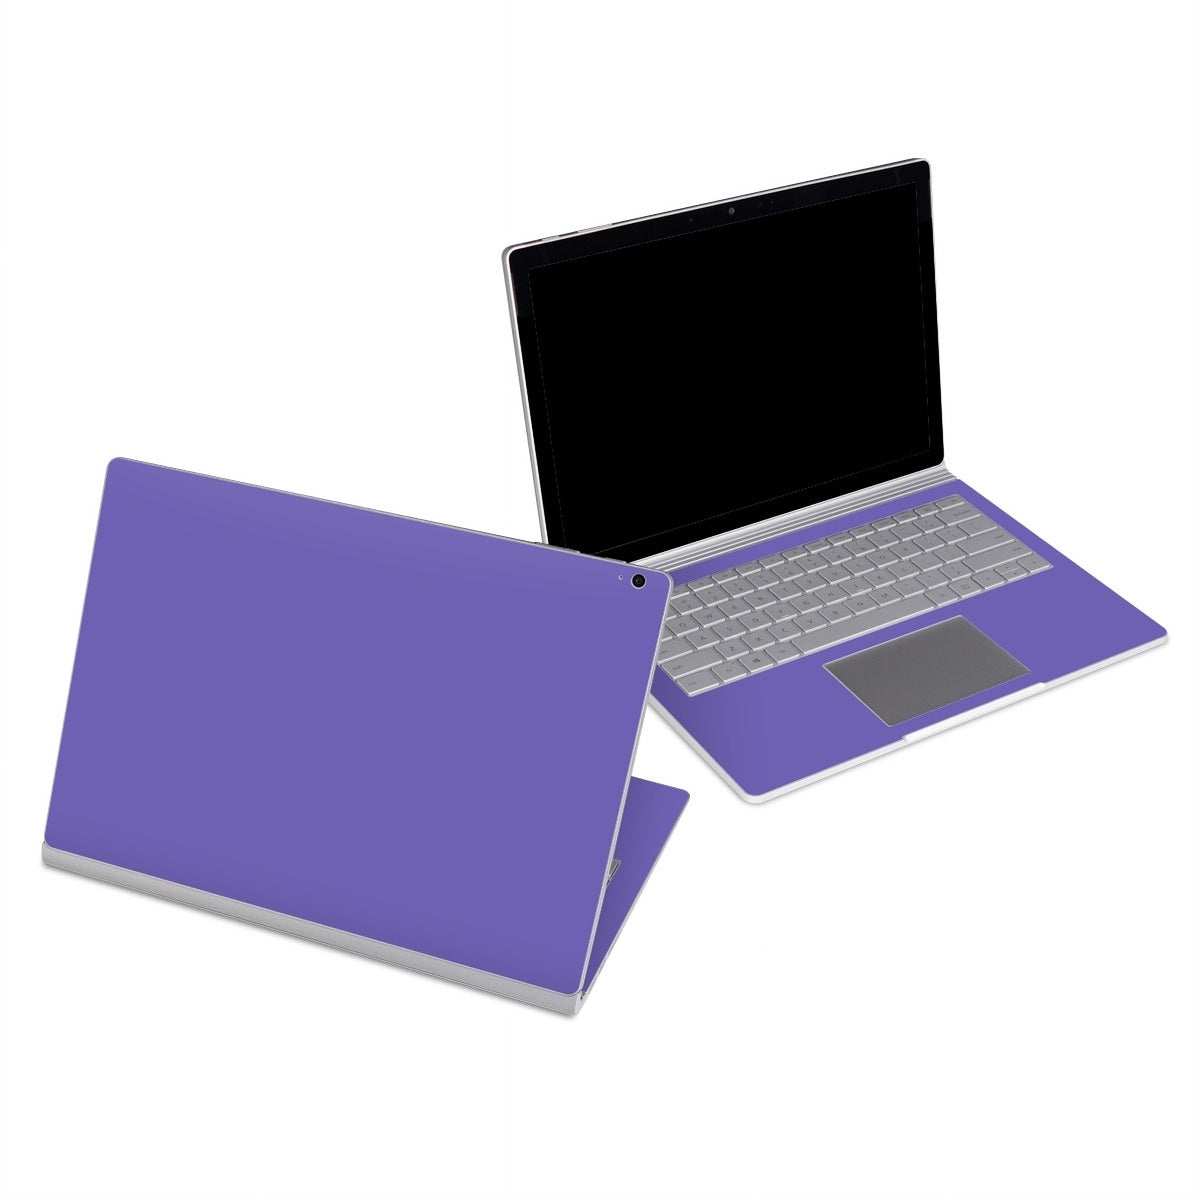 Solid State Purple - Microsoft Surface Book Skin